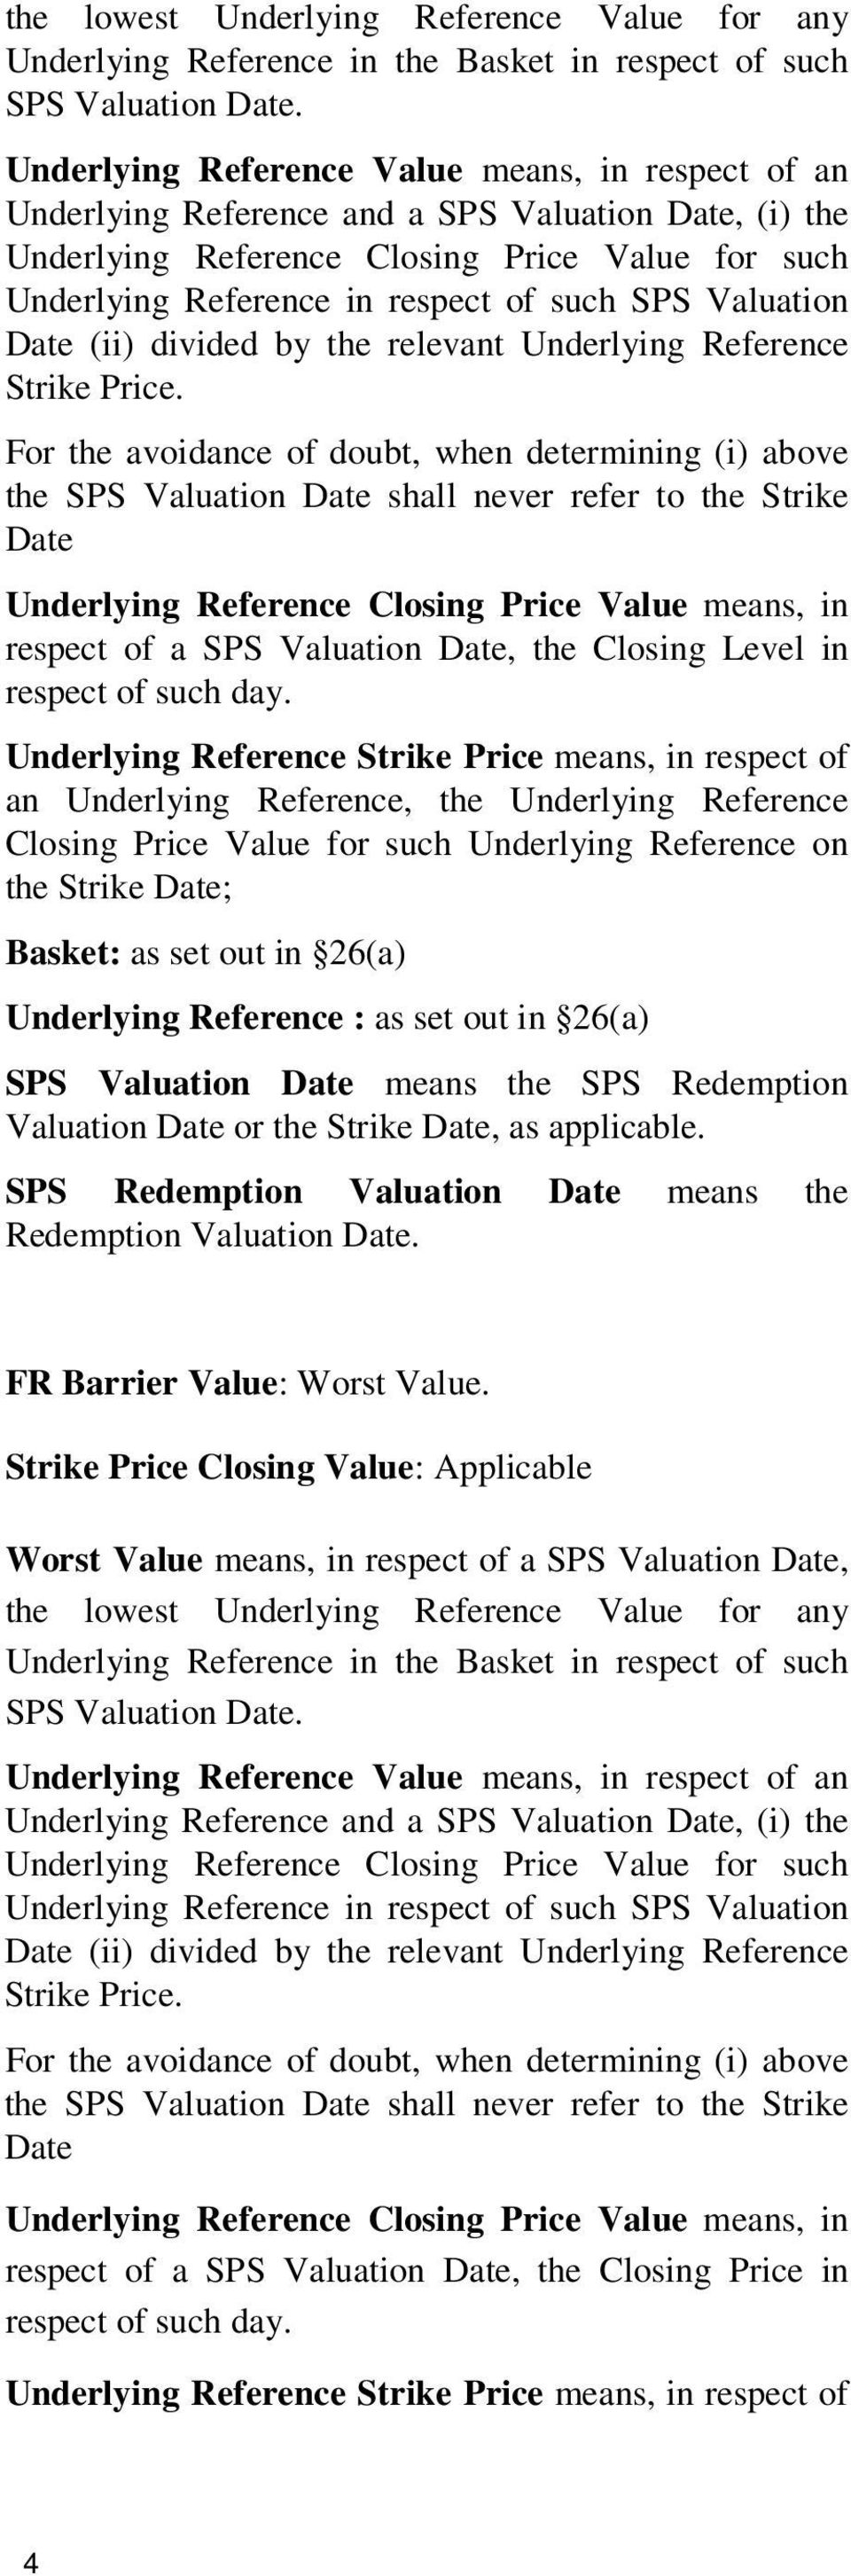 Valuation Date (ii) divided by the relevant Underlying Reference Strike Price.